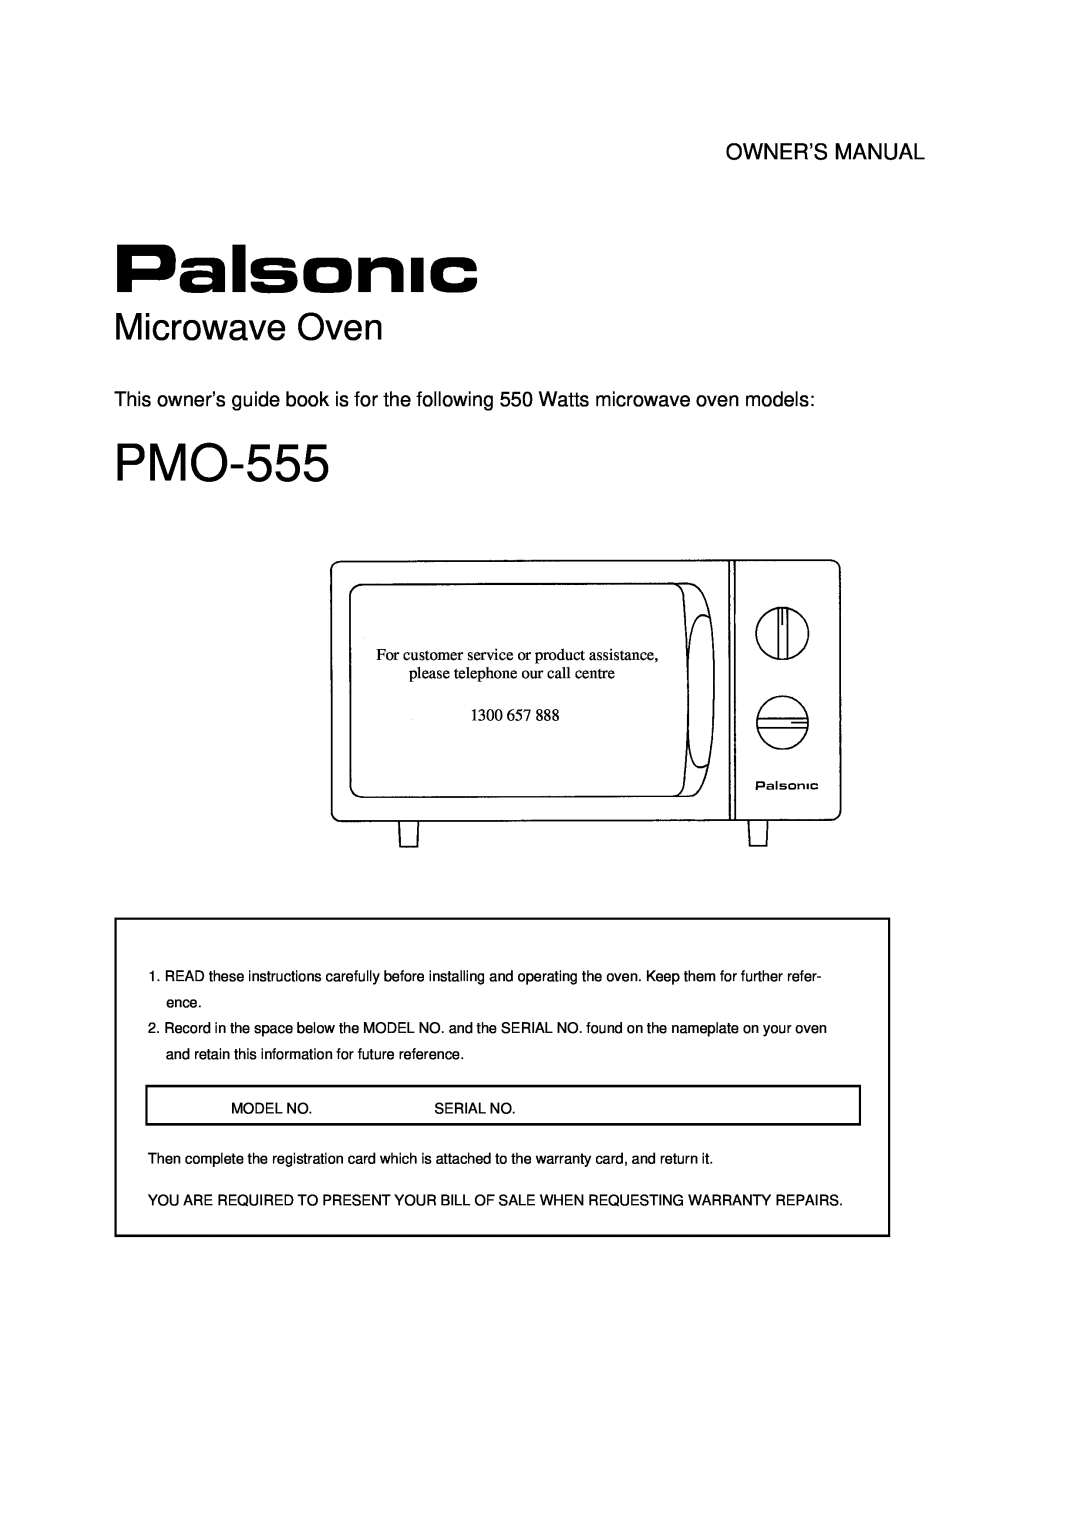 Palsonic PMO-555 owner manual Microwave Oven, 1300 